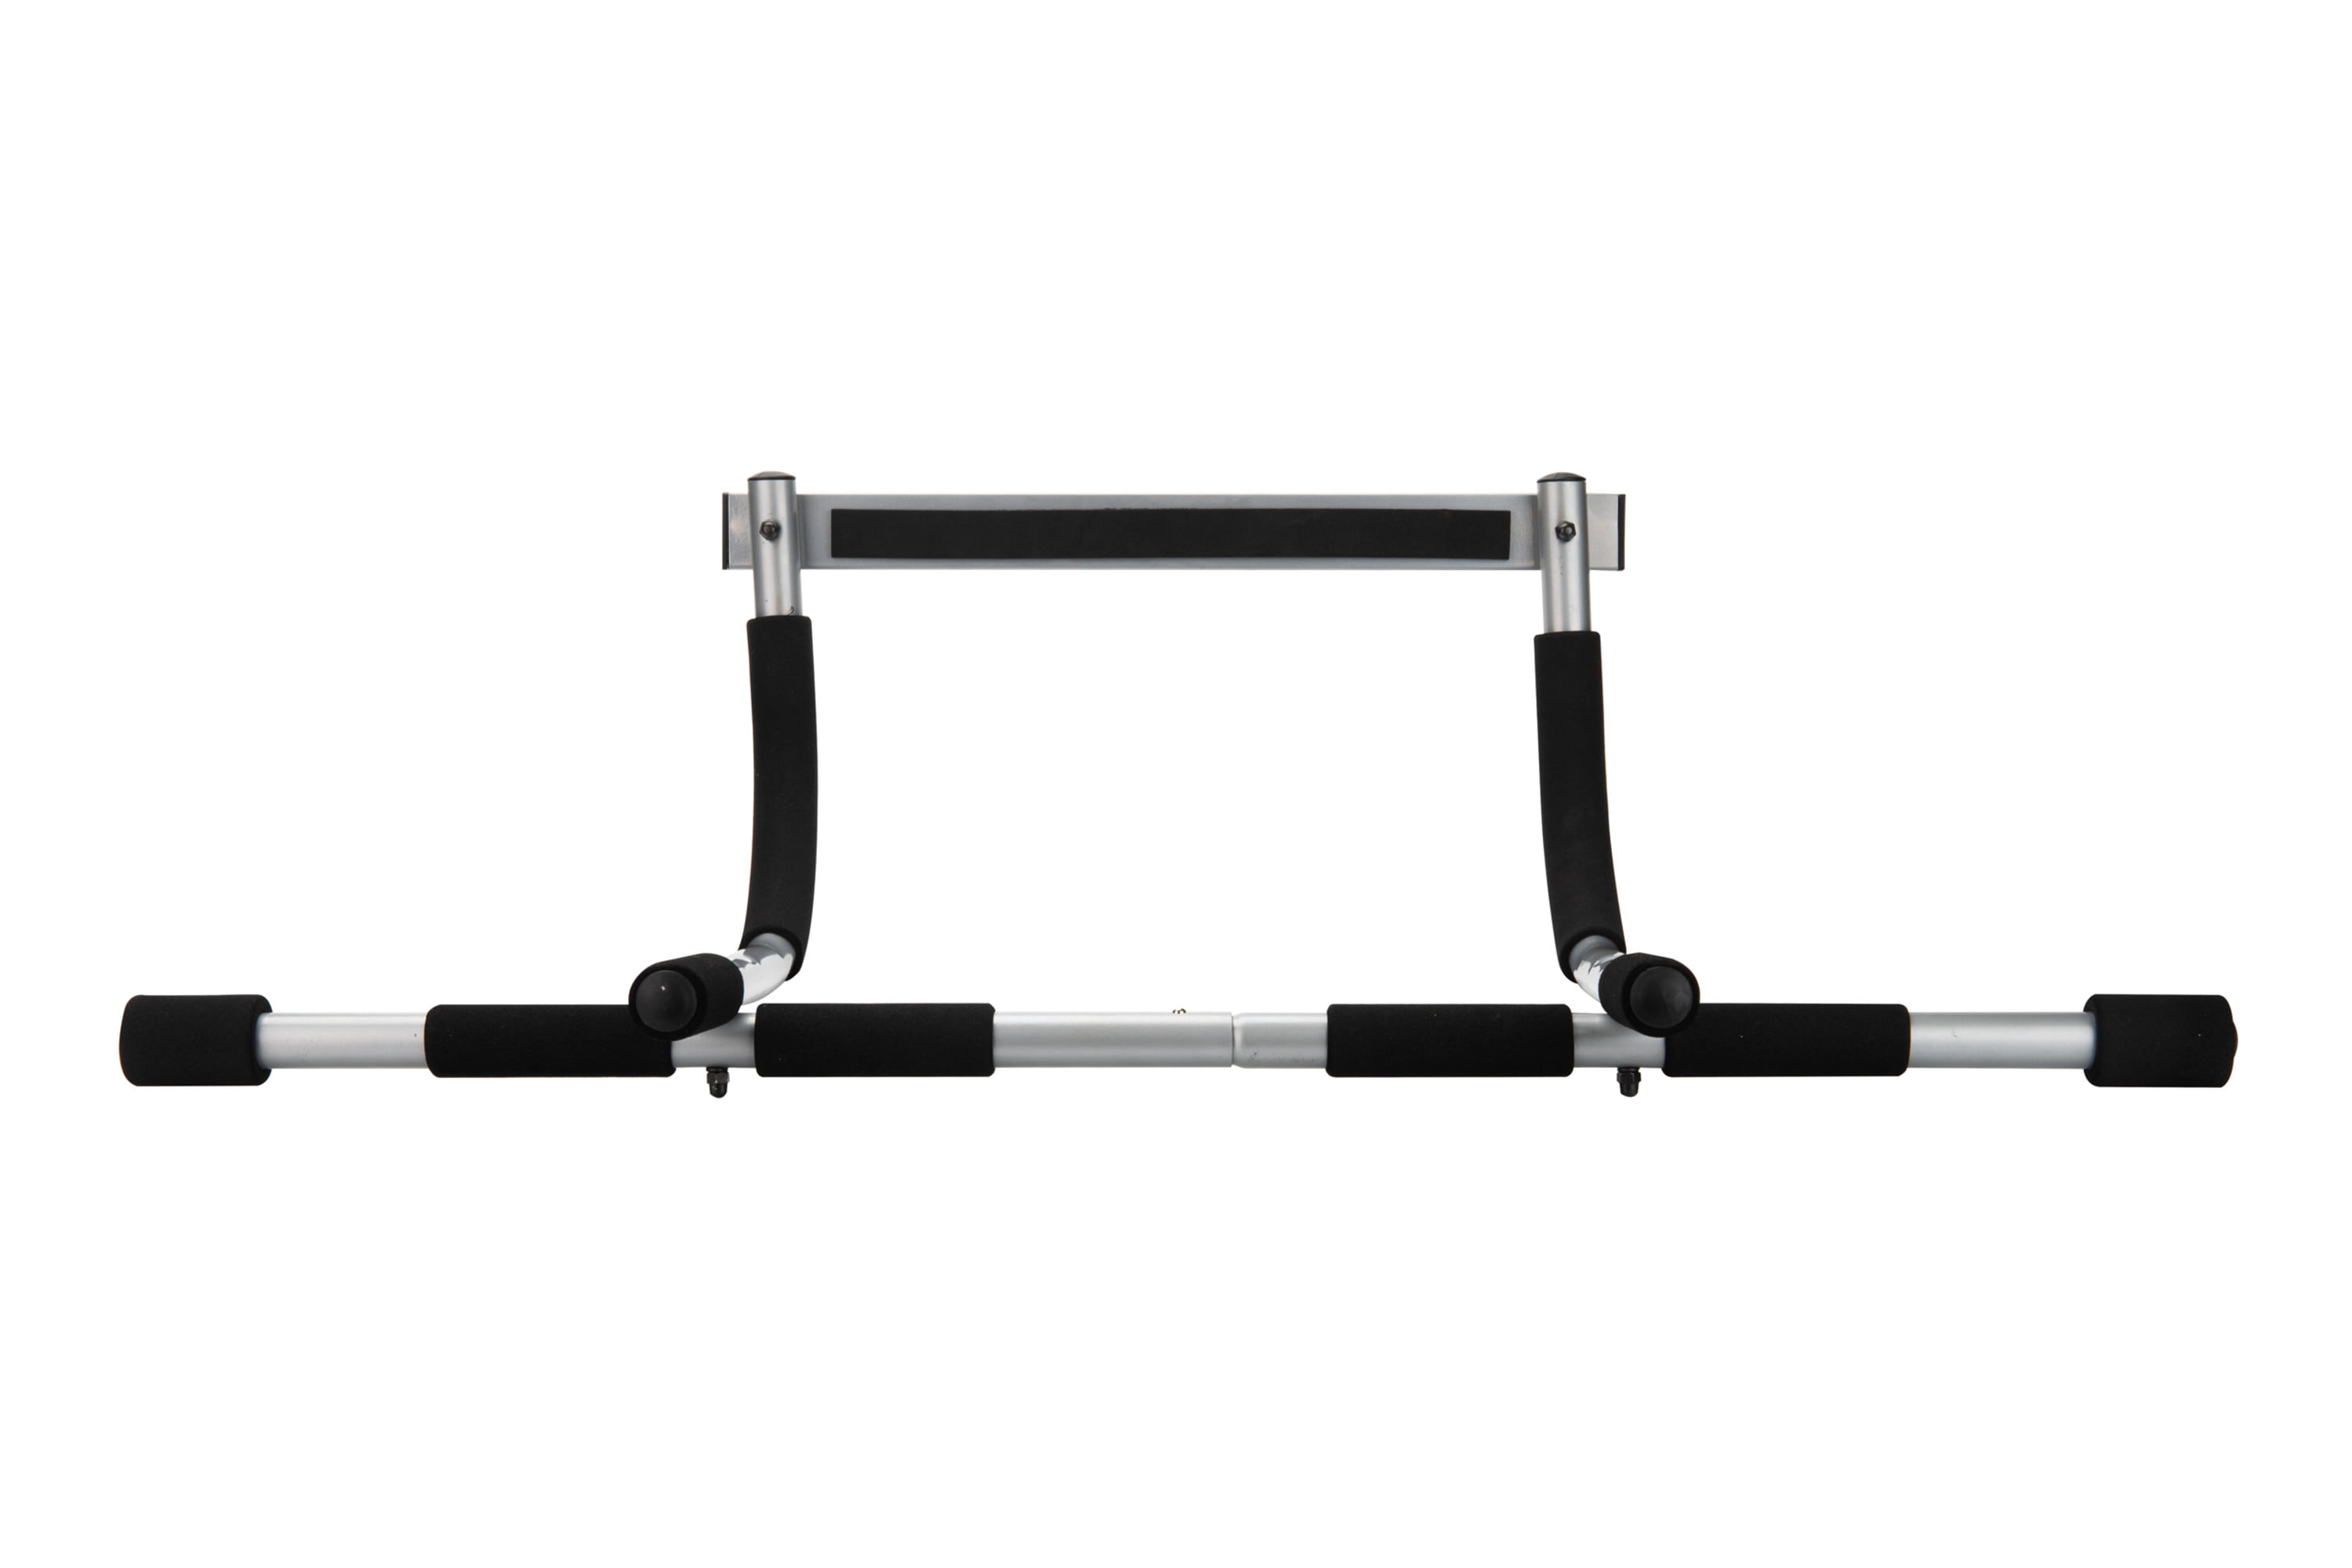 Mind Reader Pull-Up Bar for Door Frame, Doorway Pull-Up Bar, No Screws, Hardware, Foam Handles, Chin-Up Bar, Supports up to 250 lbs., Silver - Walmart.com